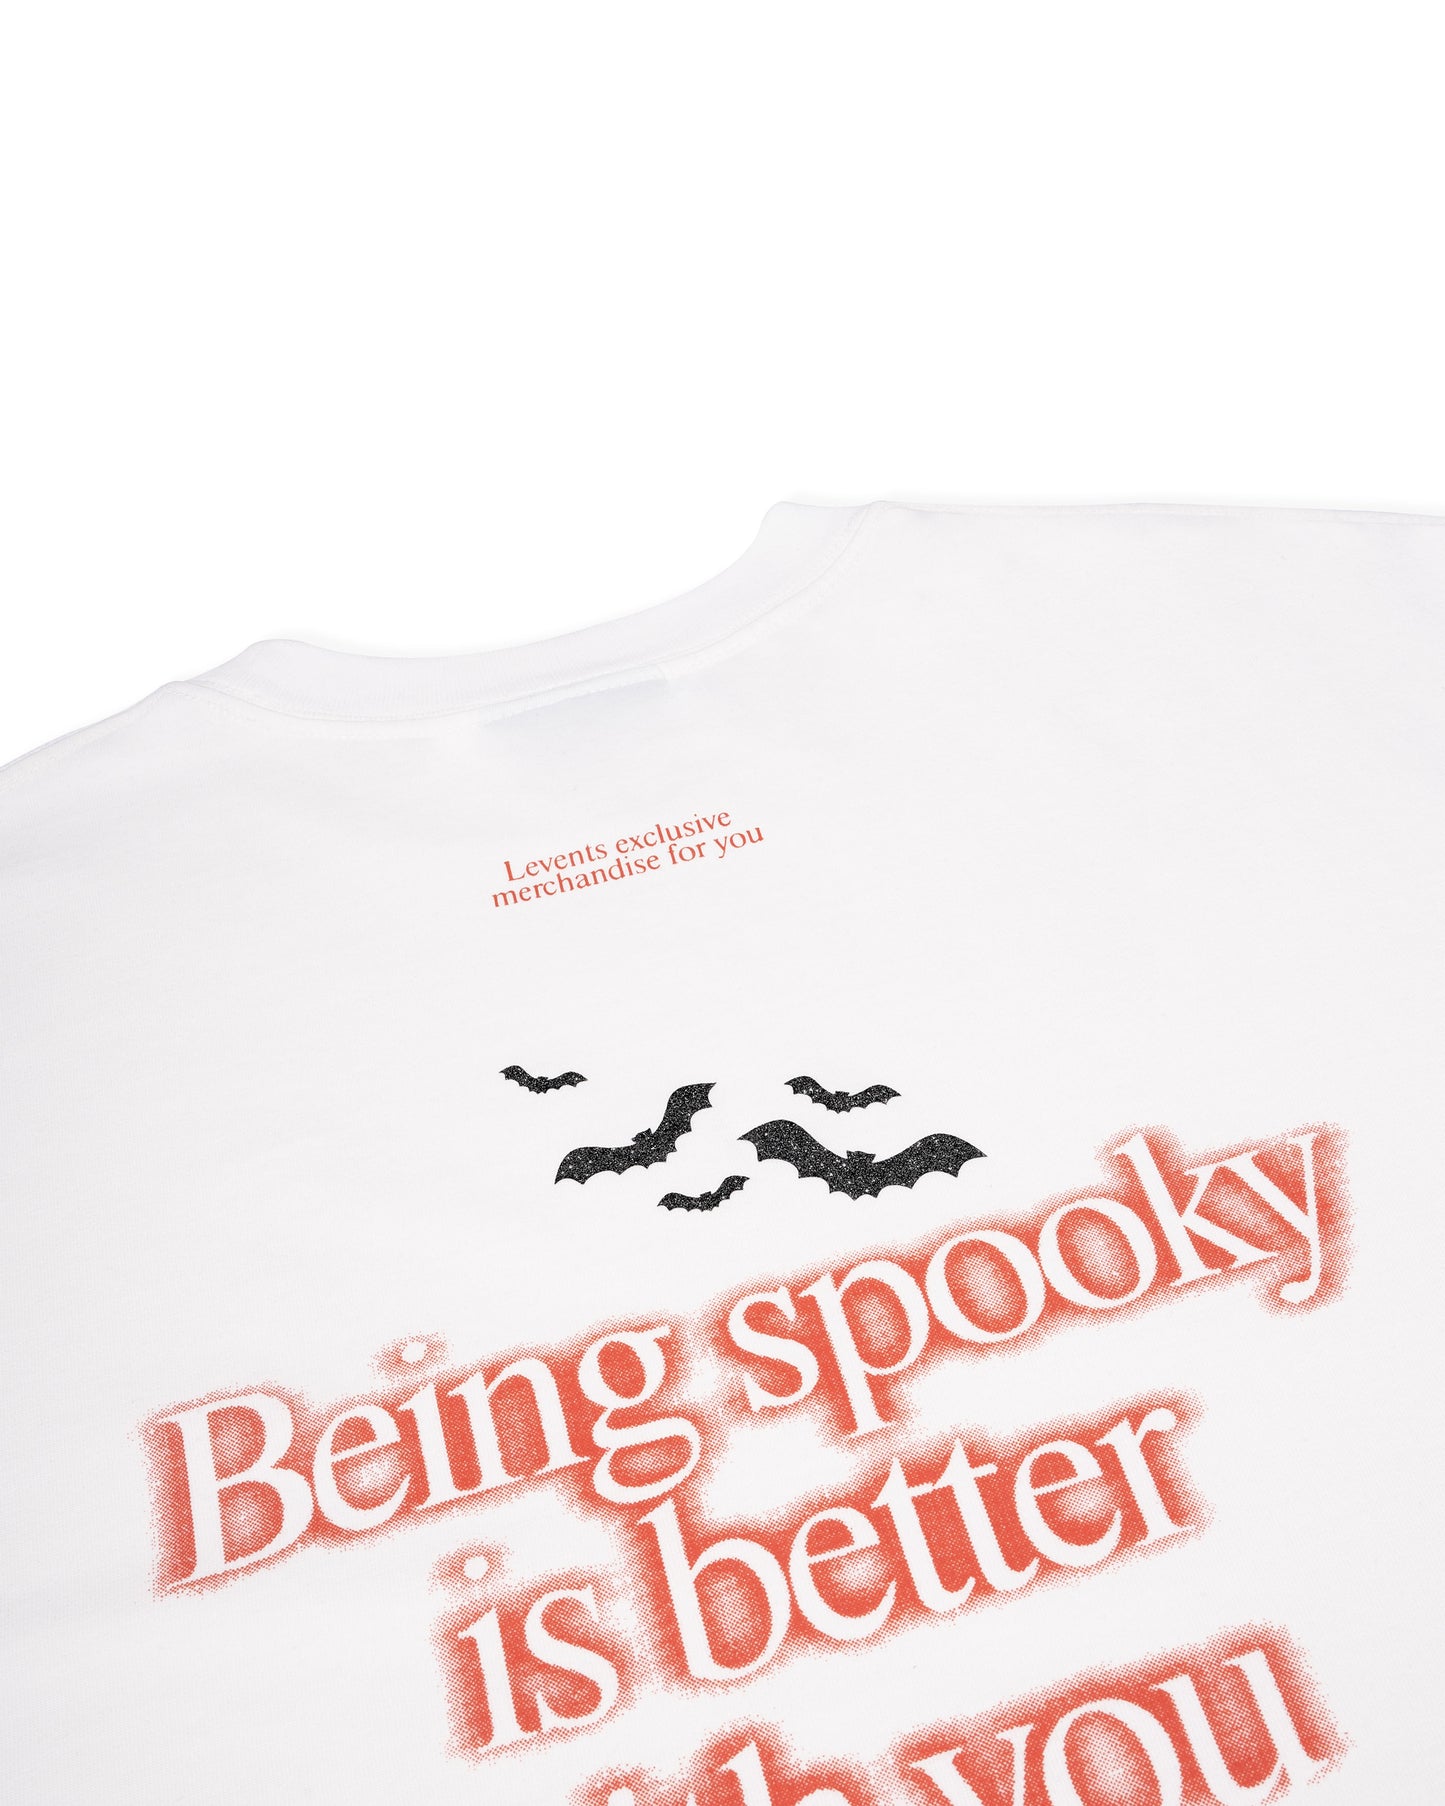 Levents® Spooky Tee/ White